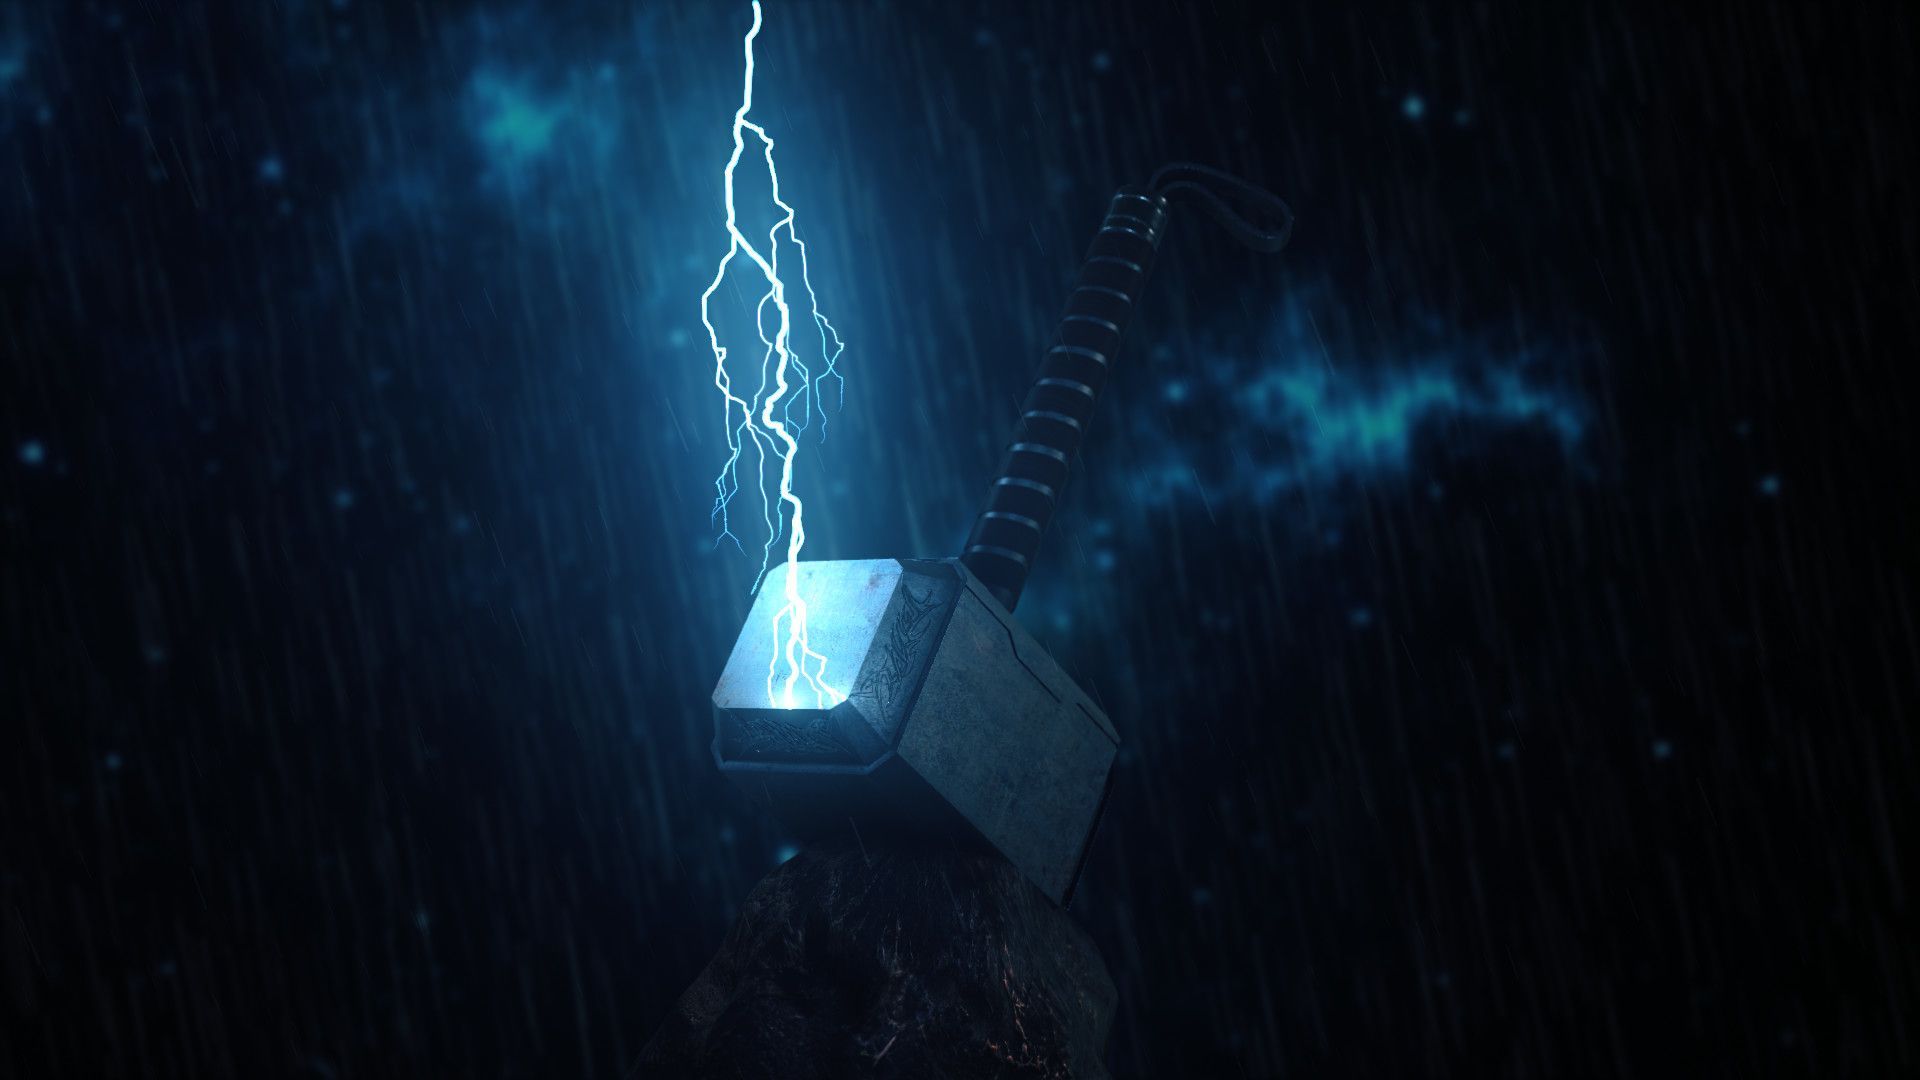 Thor with Mjolnir and Stormbreaker iPhone Wallpaper 1 - iPhone Wallpapers